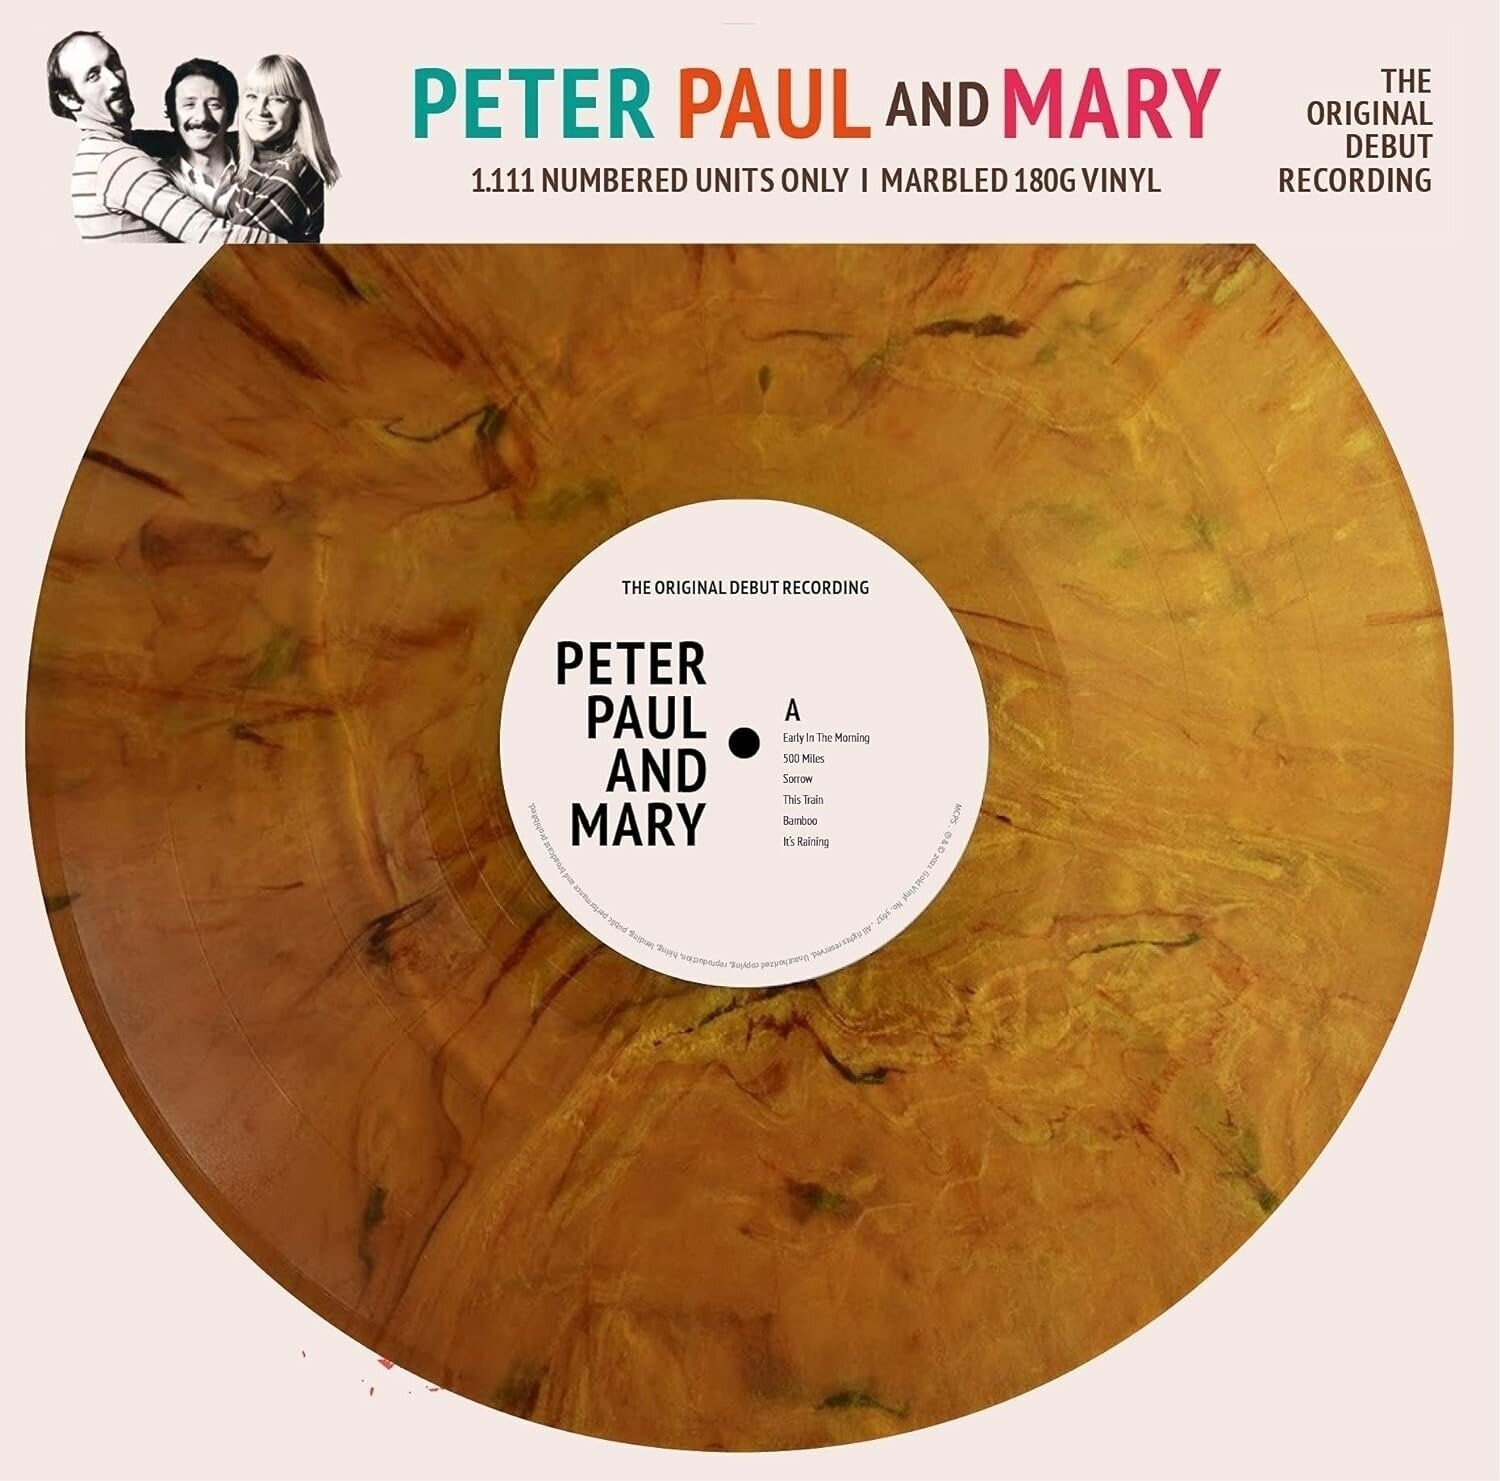 Vinyl Record Peter, Paul and Mary - The Original Debut Recording (Limited Edition) (Numbered) (Gold Marbled Coloured) (LP)